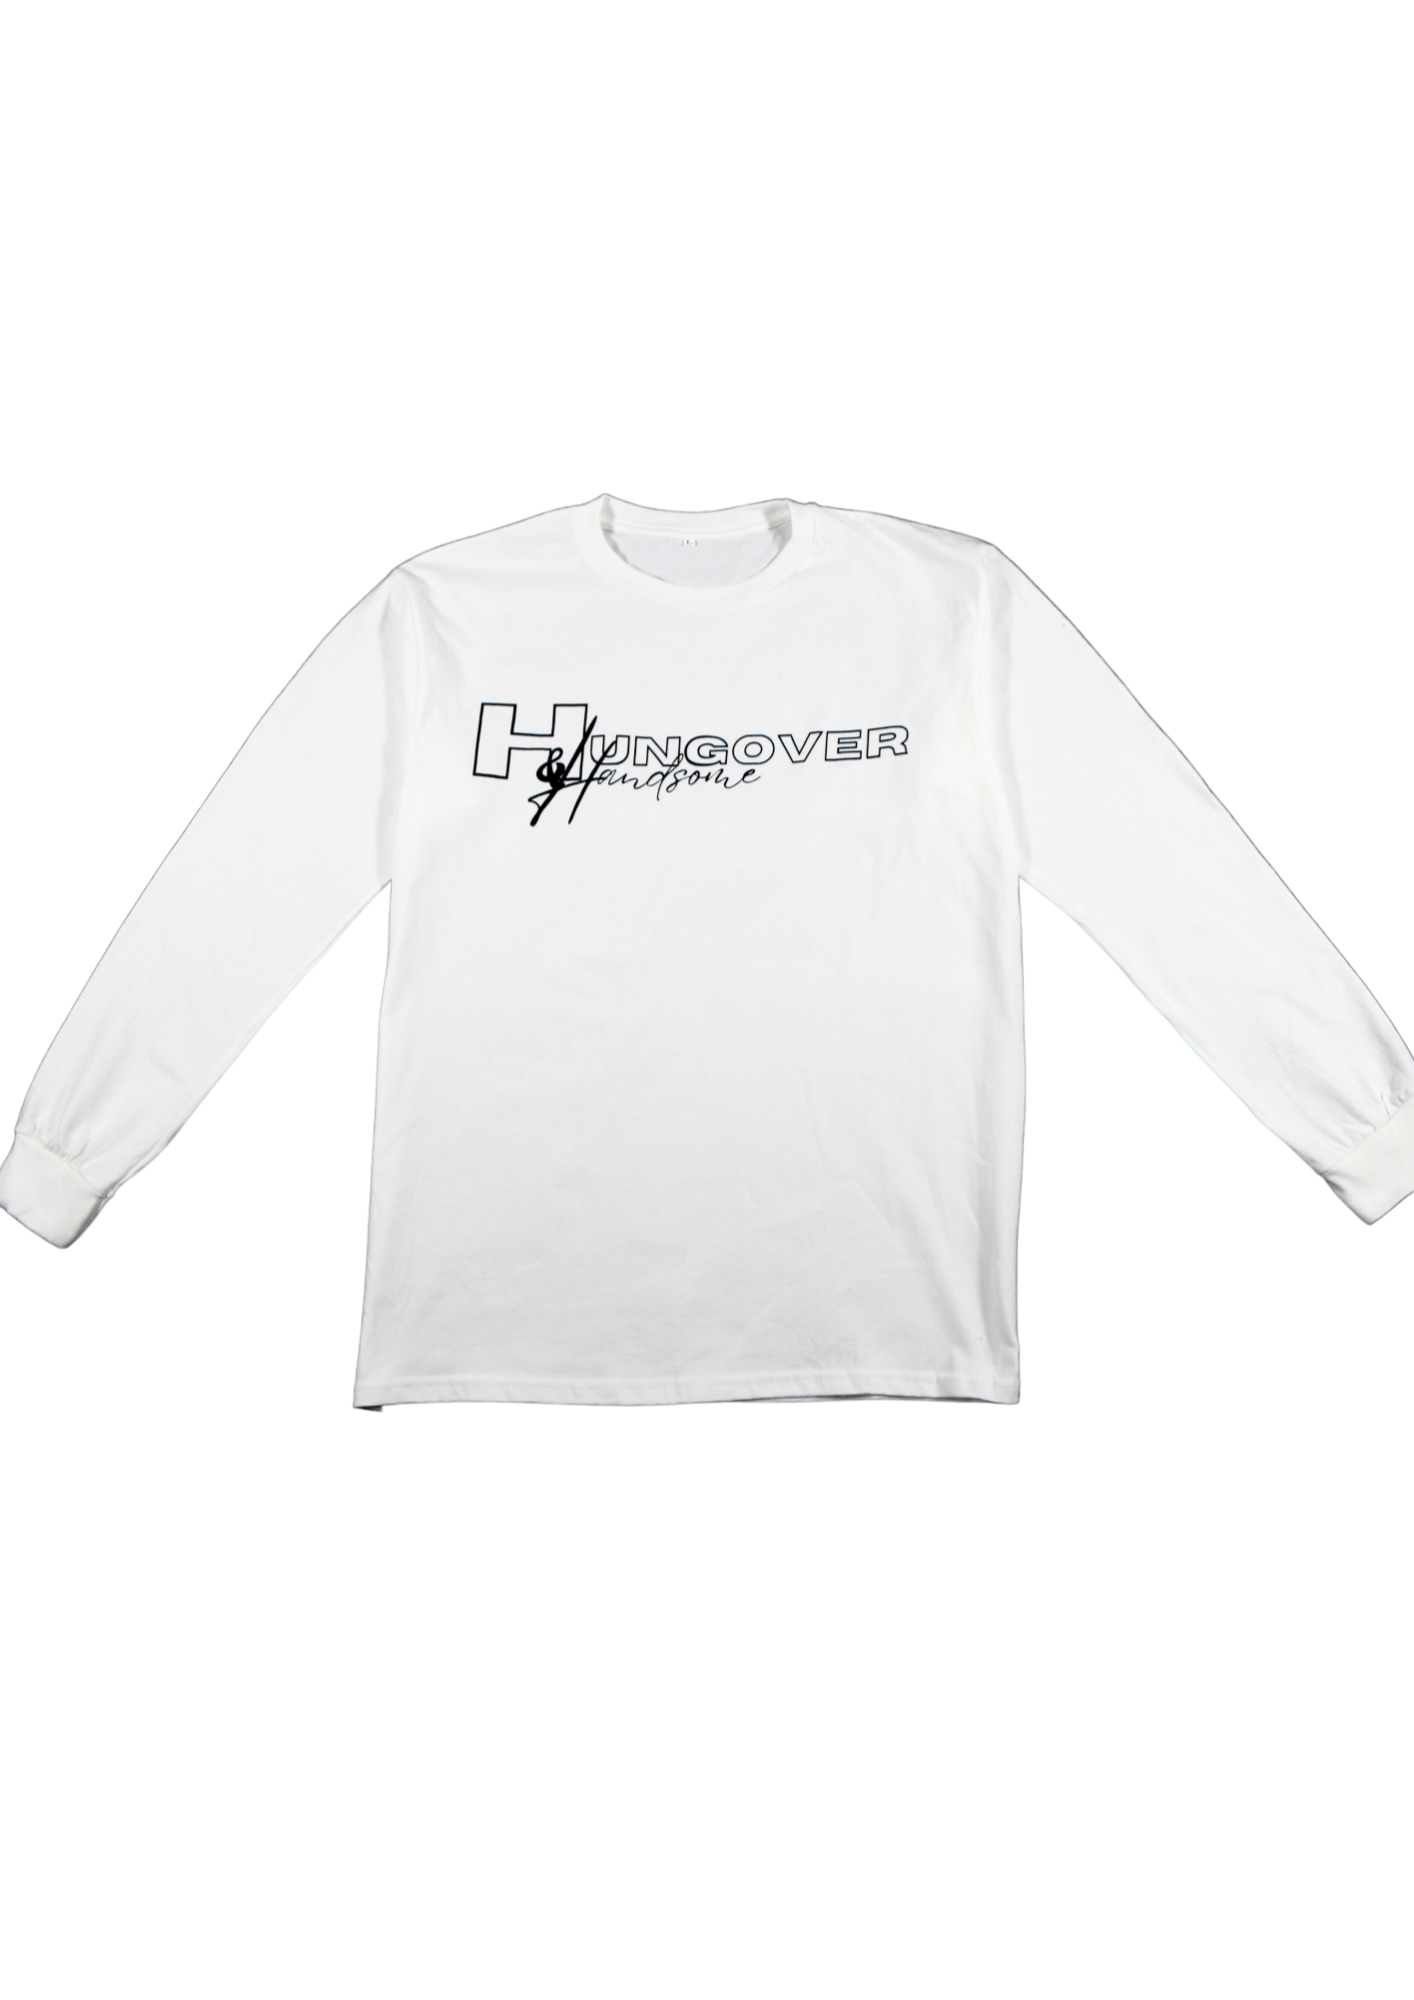 Hungover & Handsome Long Sleeve - White